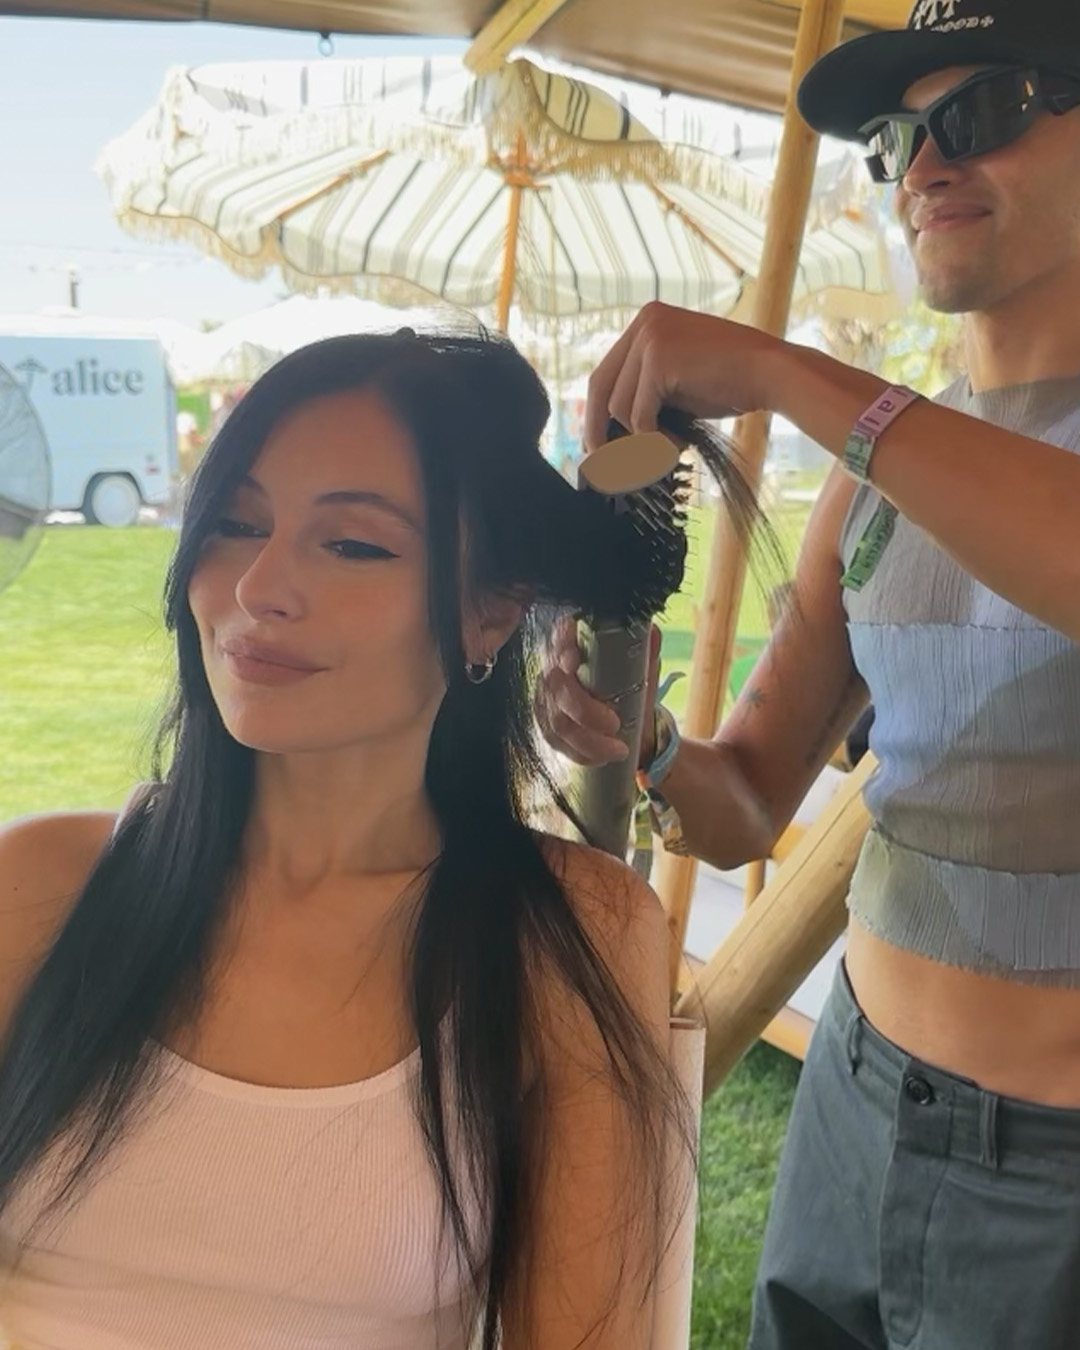 Camper getting her hair done for Coachella